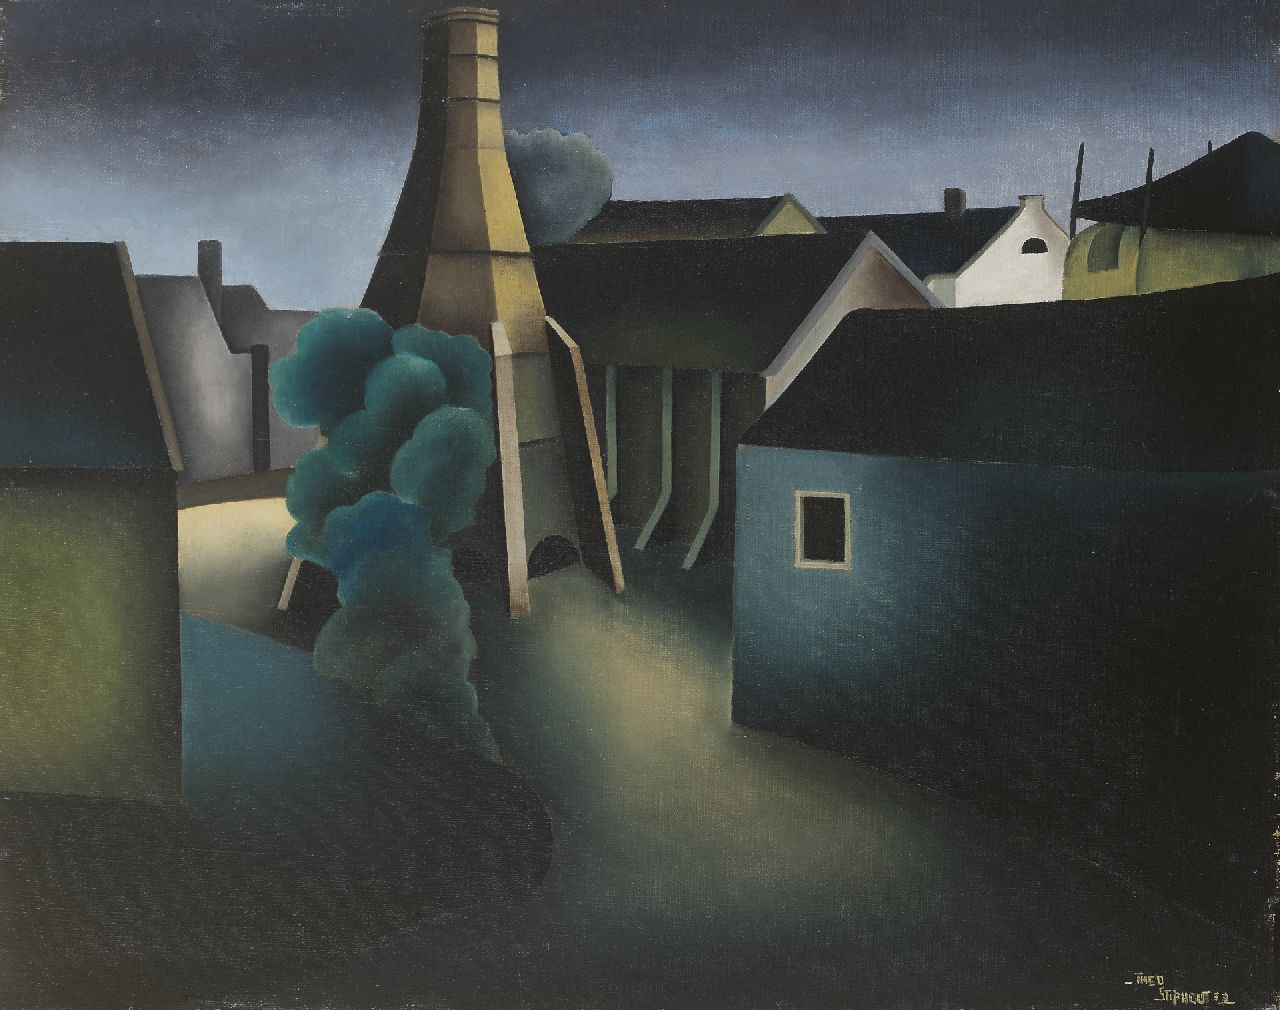 Stiphout T.G.W.  | Theodorus Gerardus Wilhelmus 'Theo' Stiphout, Limekiln and houses, oil on canvas 40.0 x 50.3 cm, signed l.r. and on the reverse and dated '33